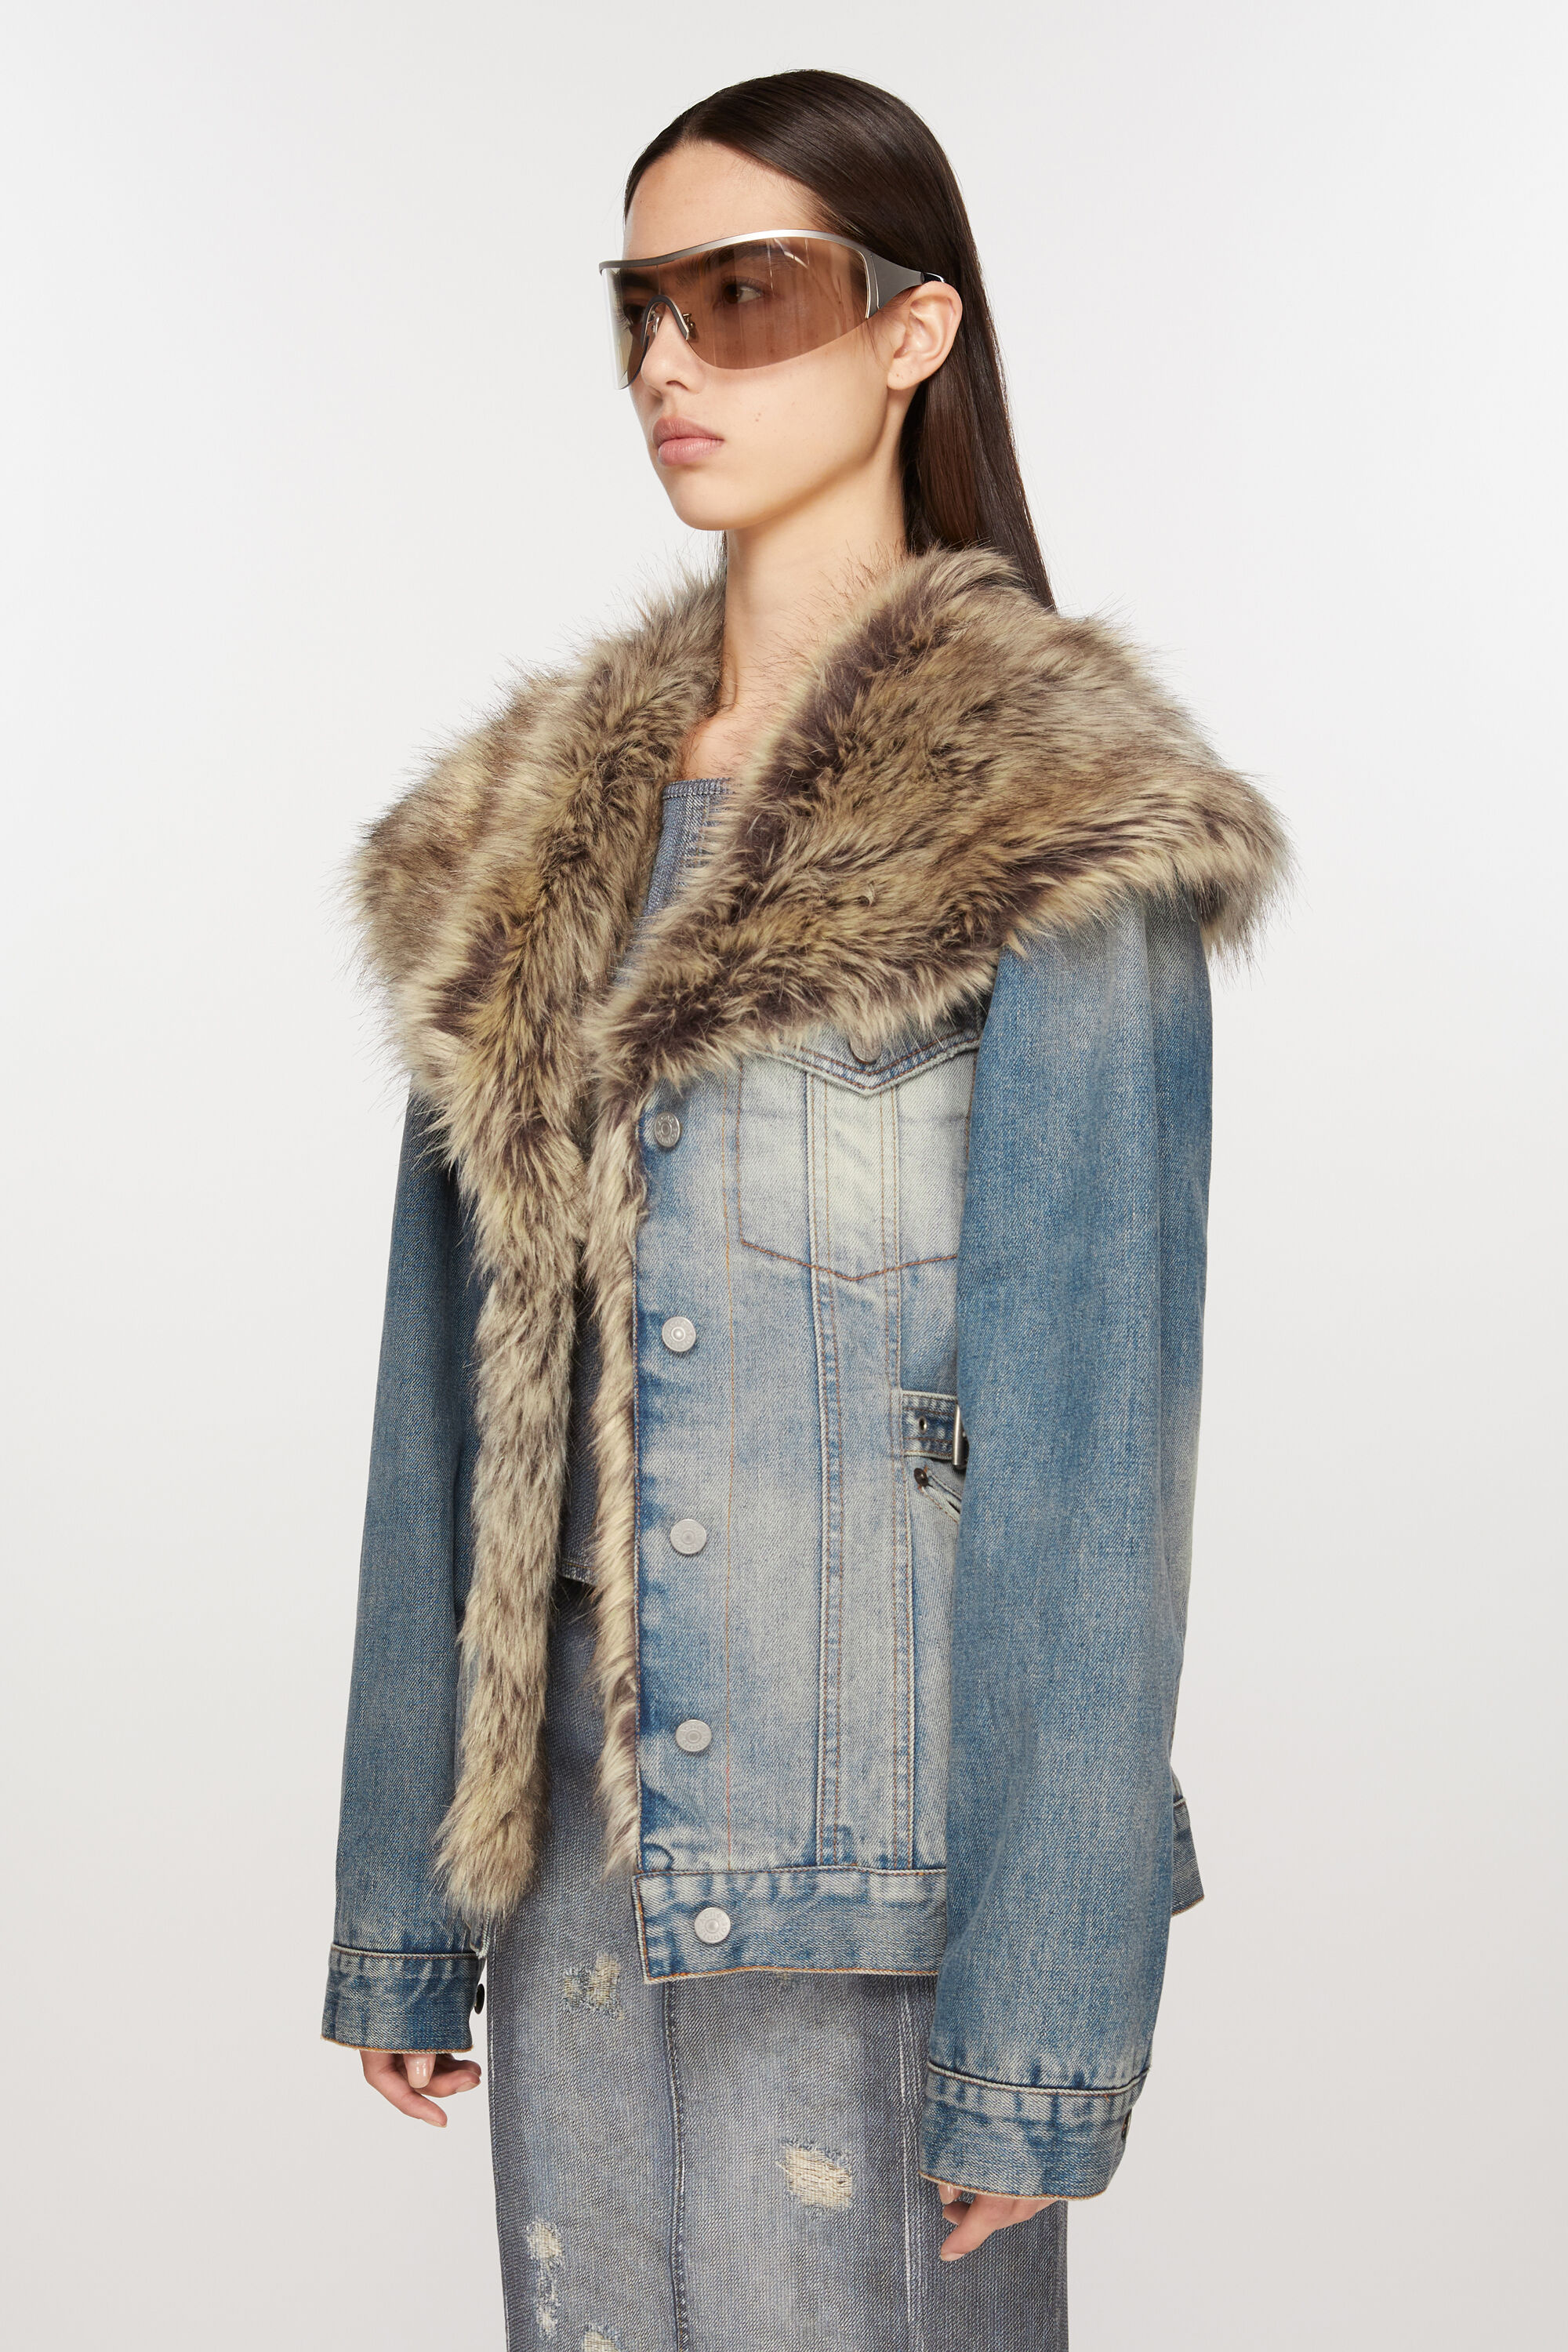 20 Women Outfits With Fur Collar Denim Jackets - Styleoholic